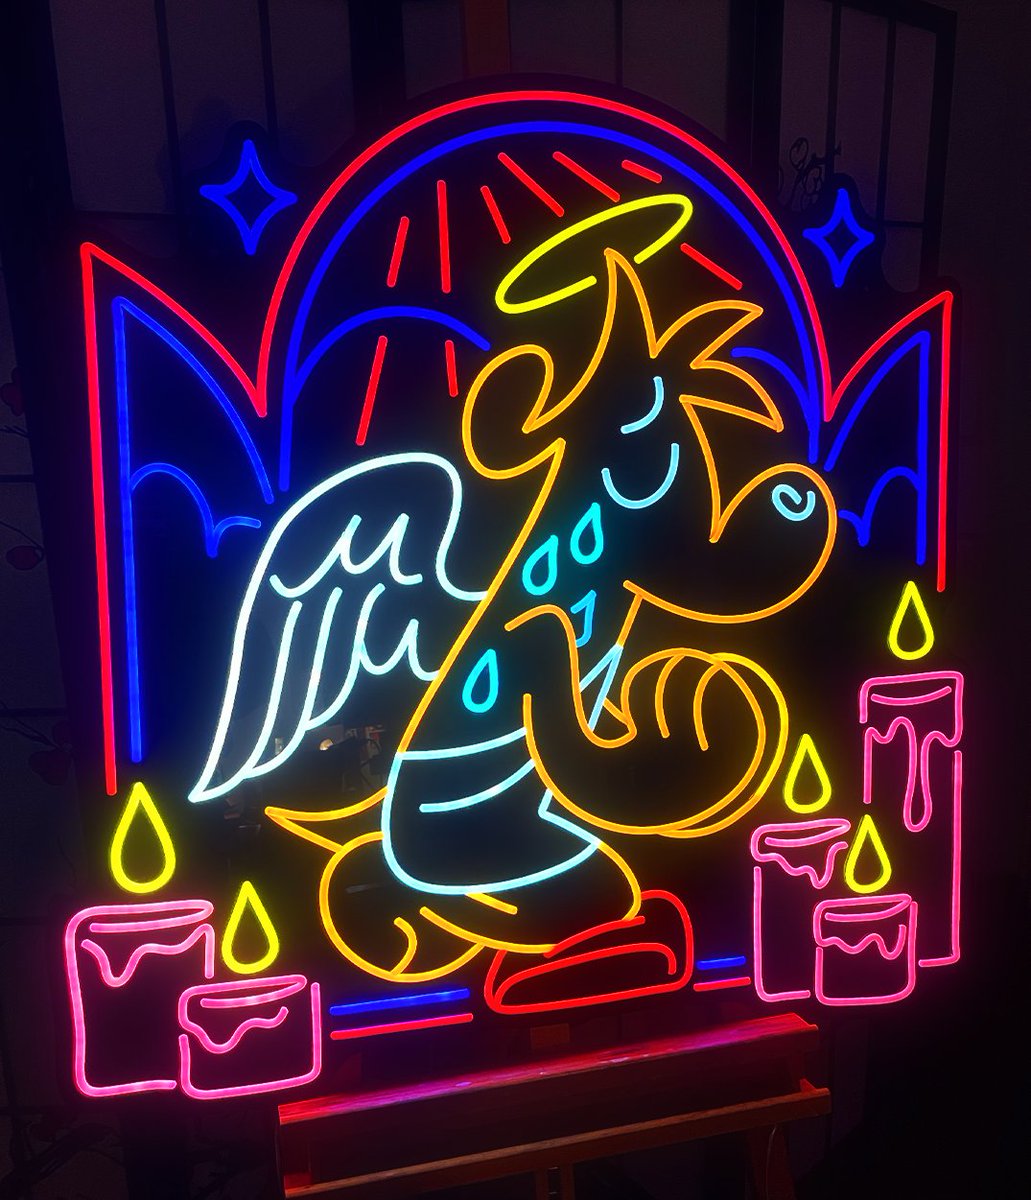 thank u @bps_neonsigns for sending me this led neon sign!!!!!!! it looks so fantastic i love it 💕💕💕